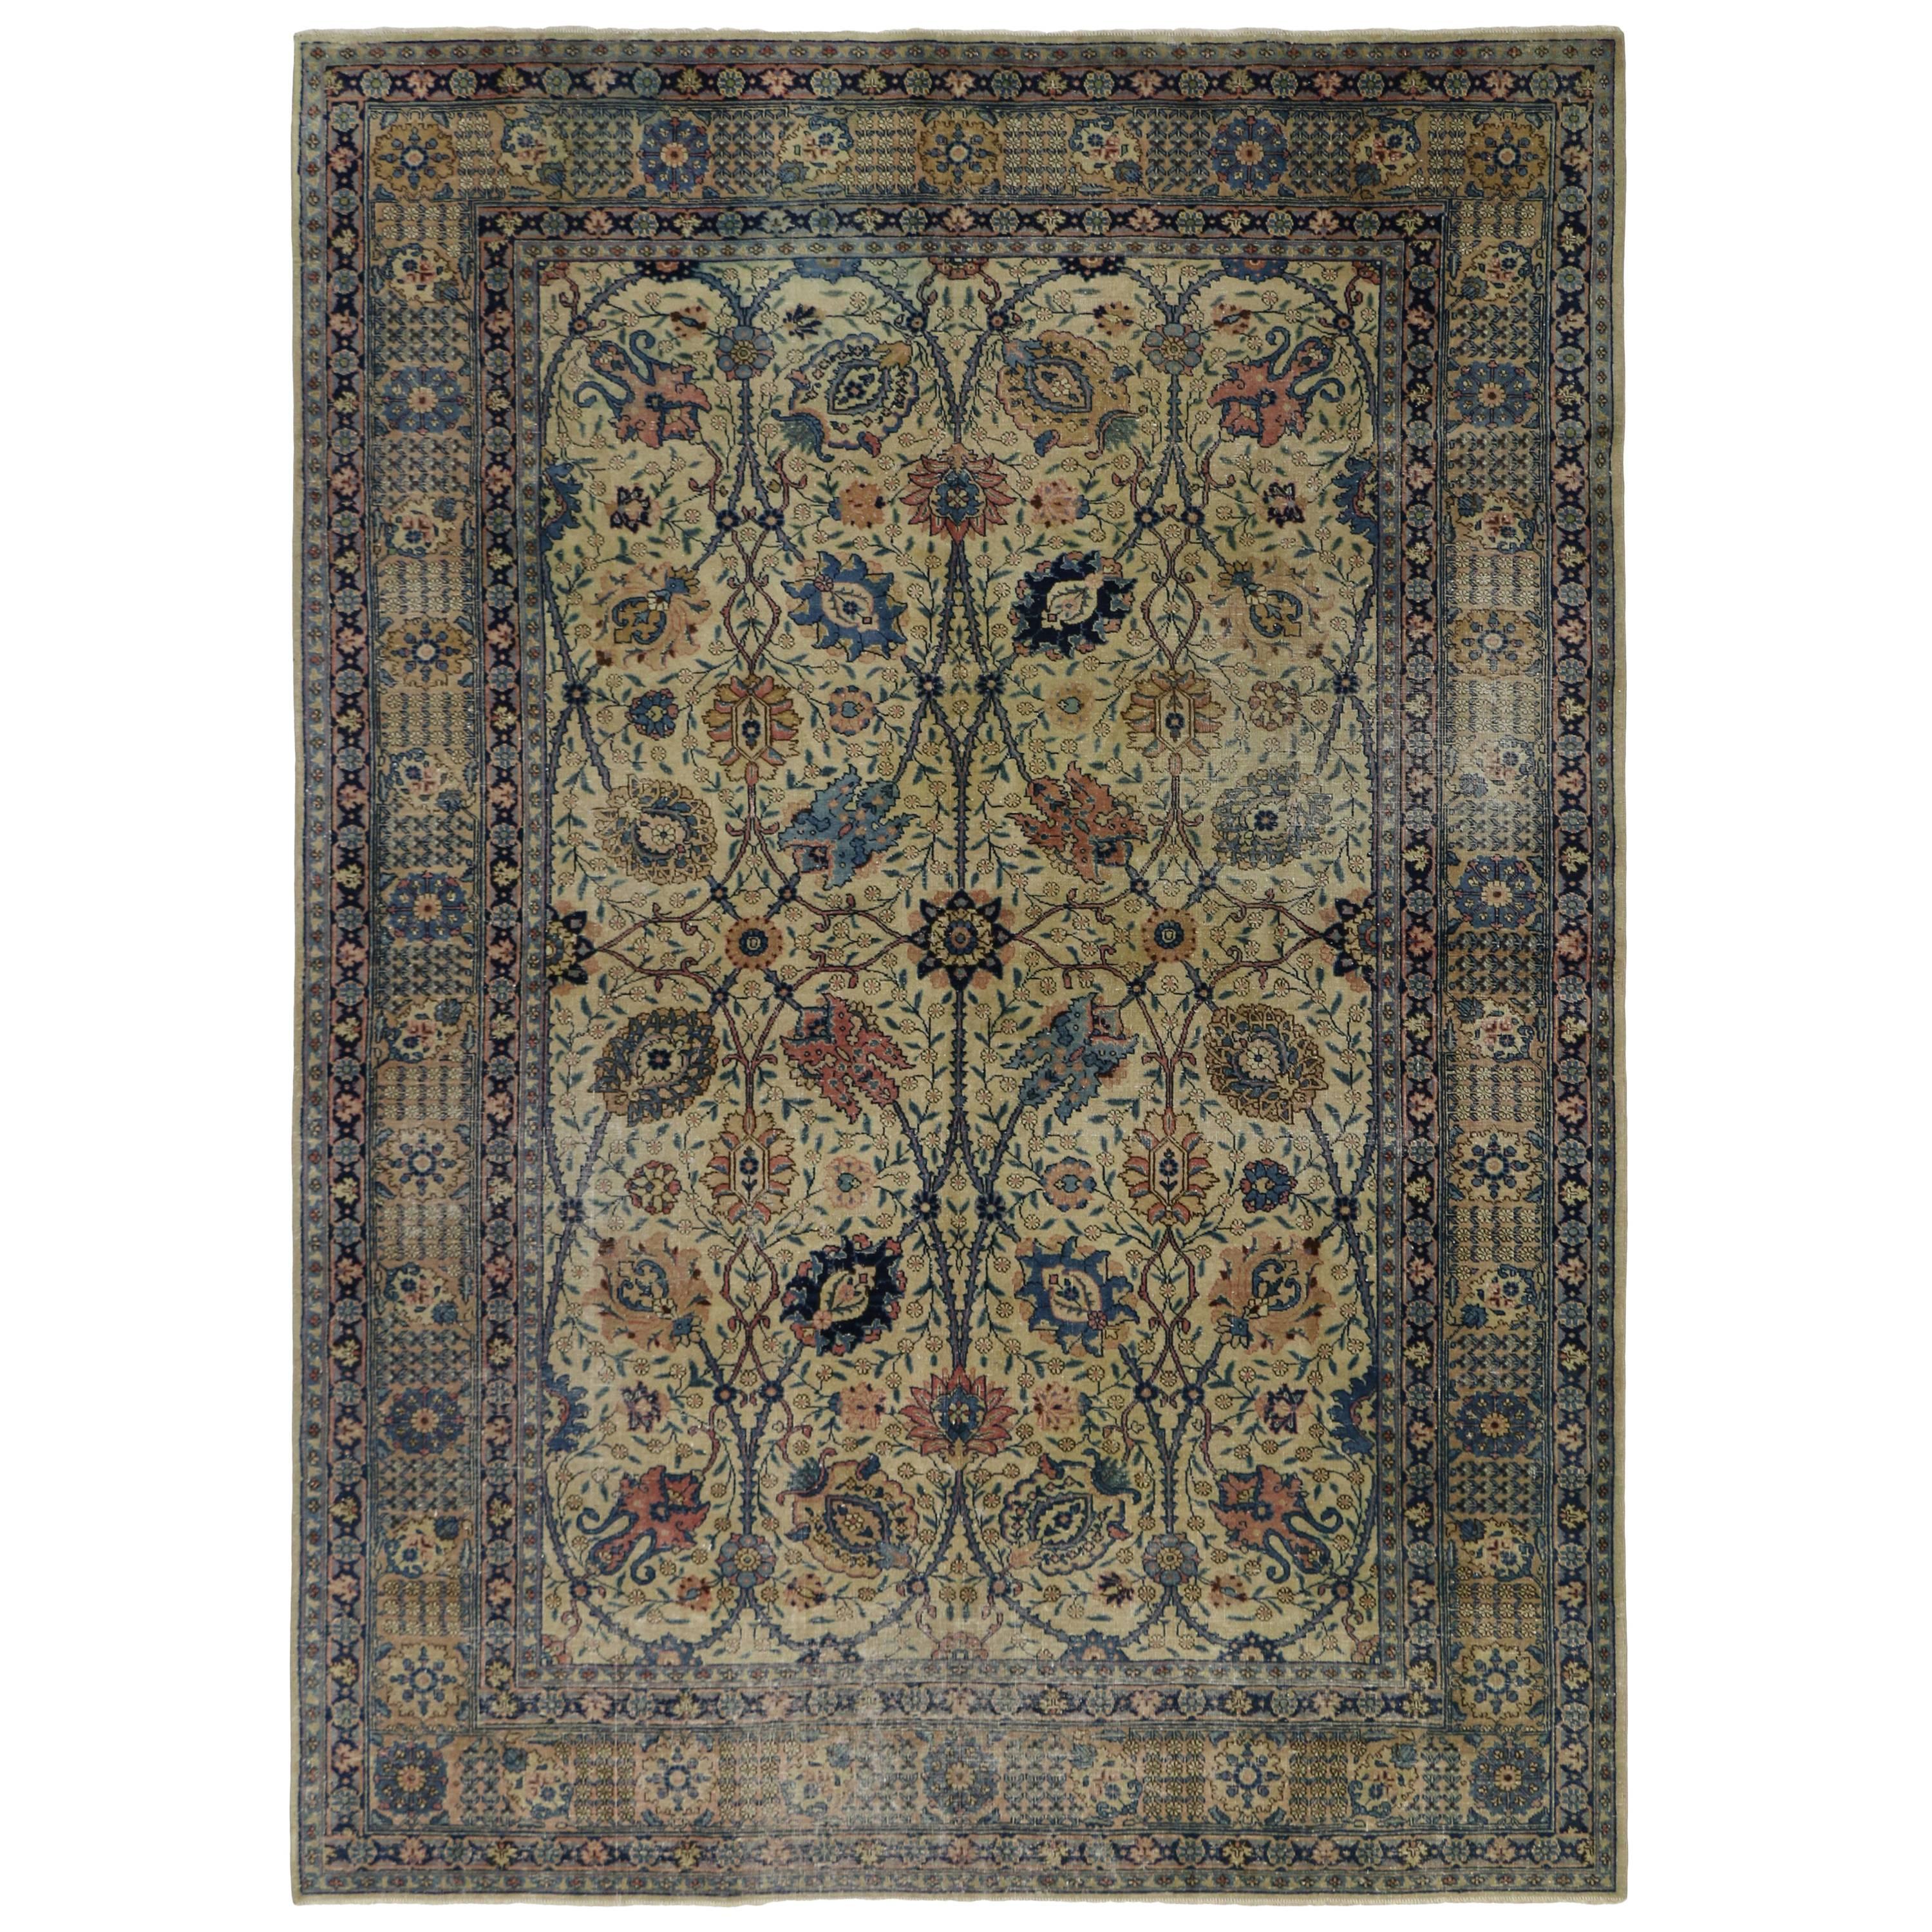 Distressed Antique Persian Tabriz Rug with Georgian Romantic Chippendale Style